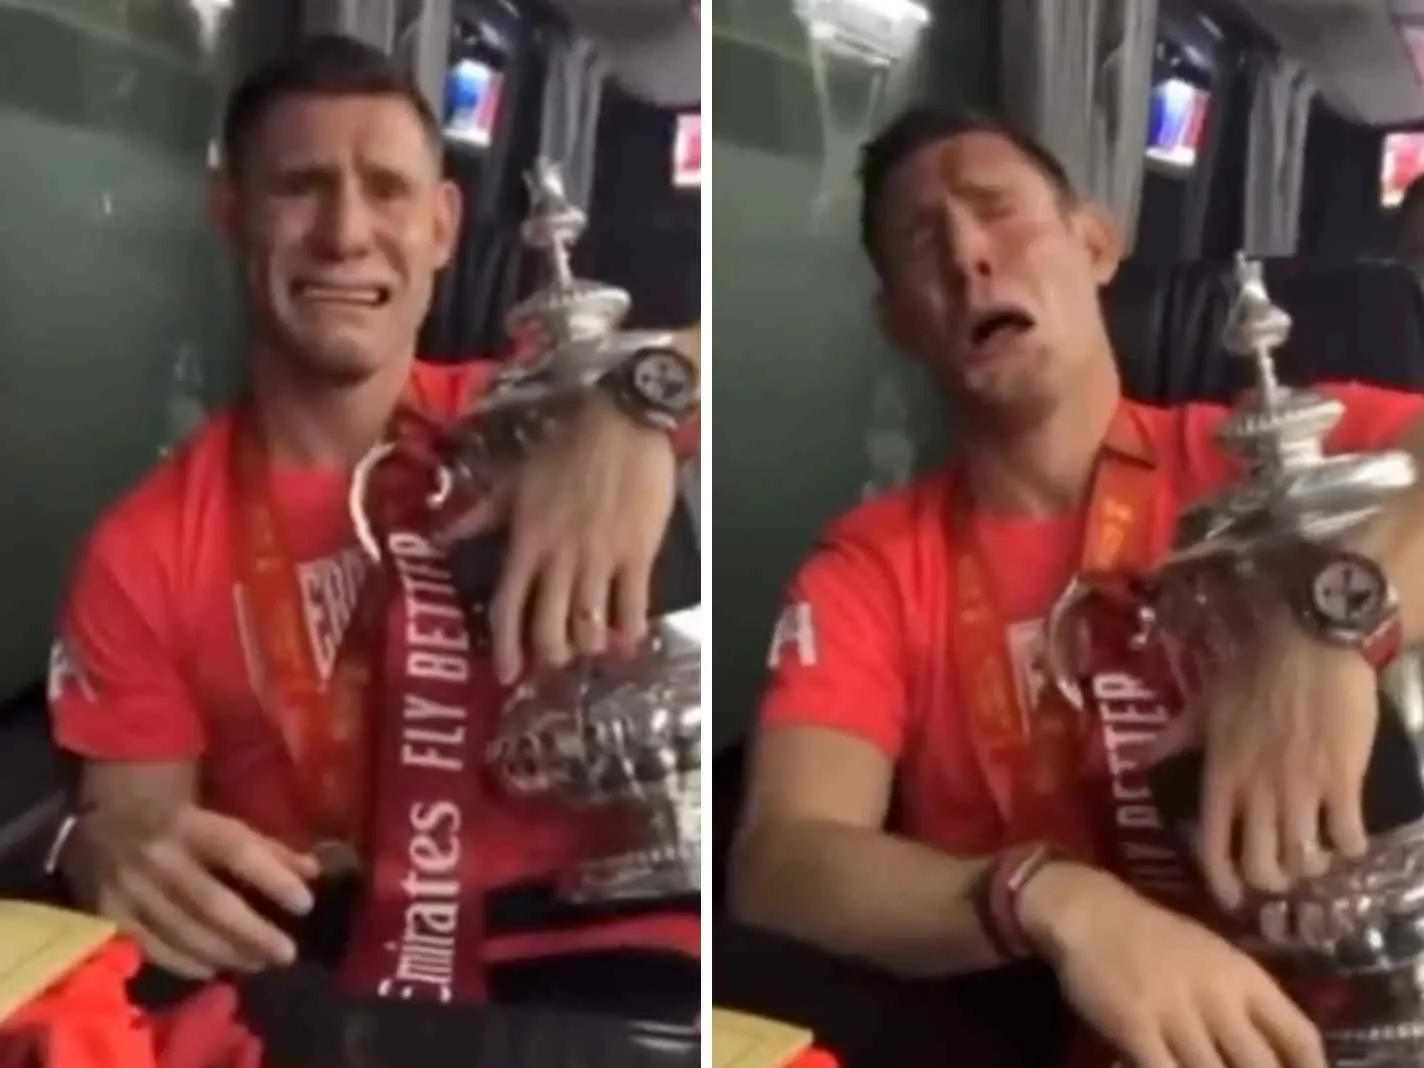 In this image - James Milner appears to be crying because of a Snapchat filter